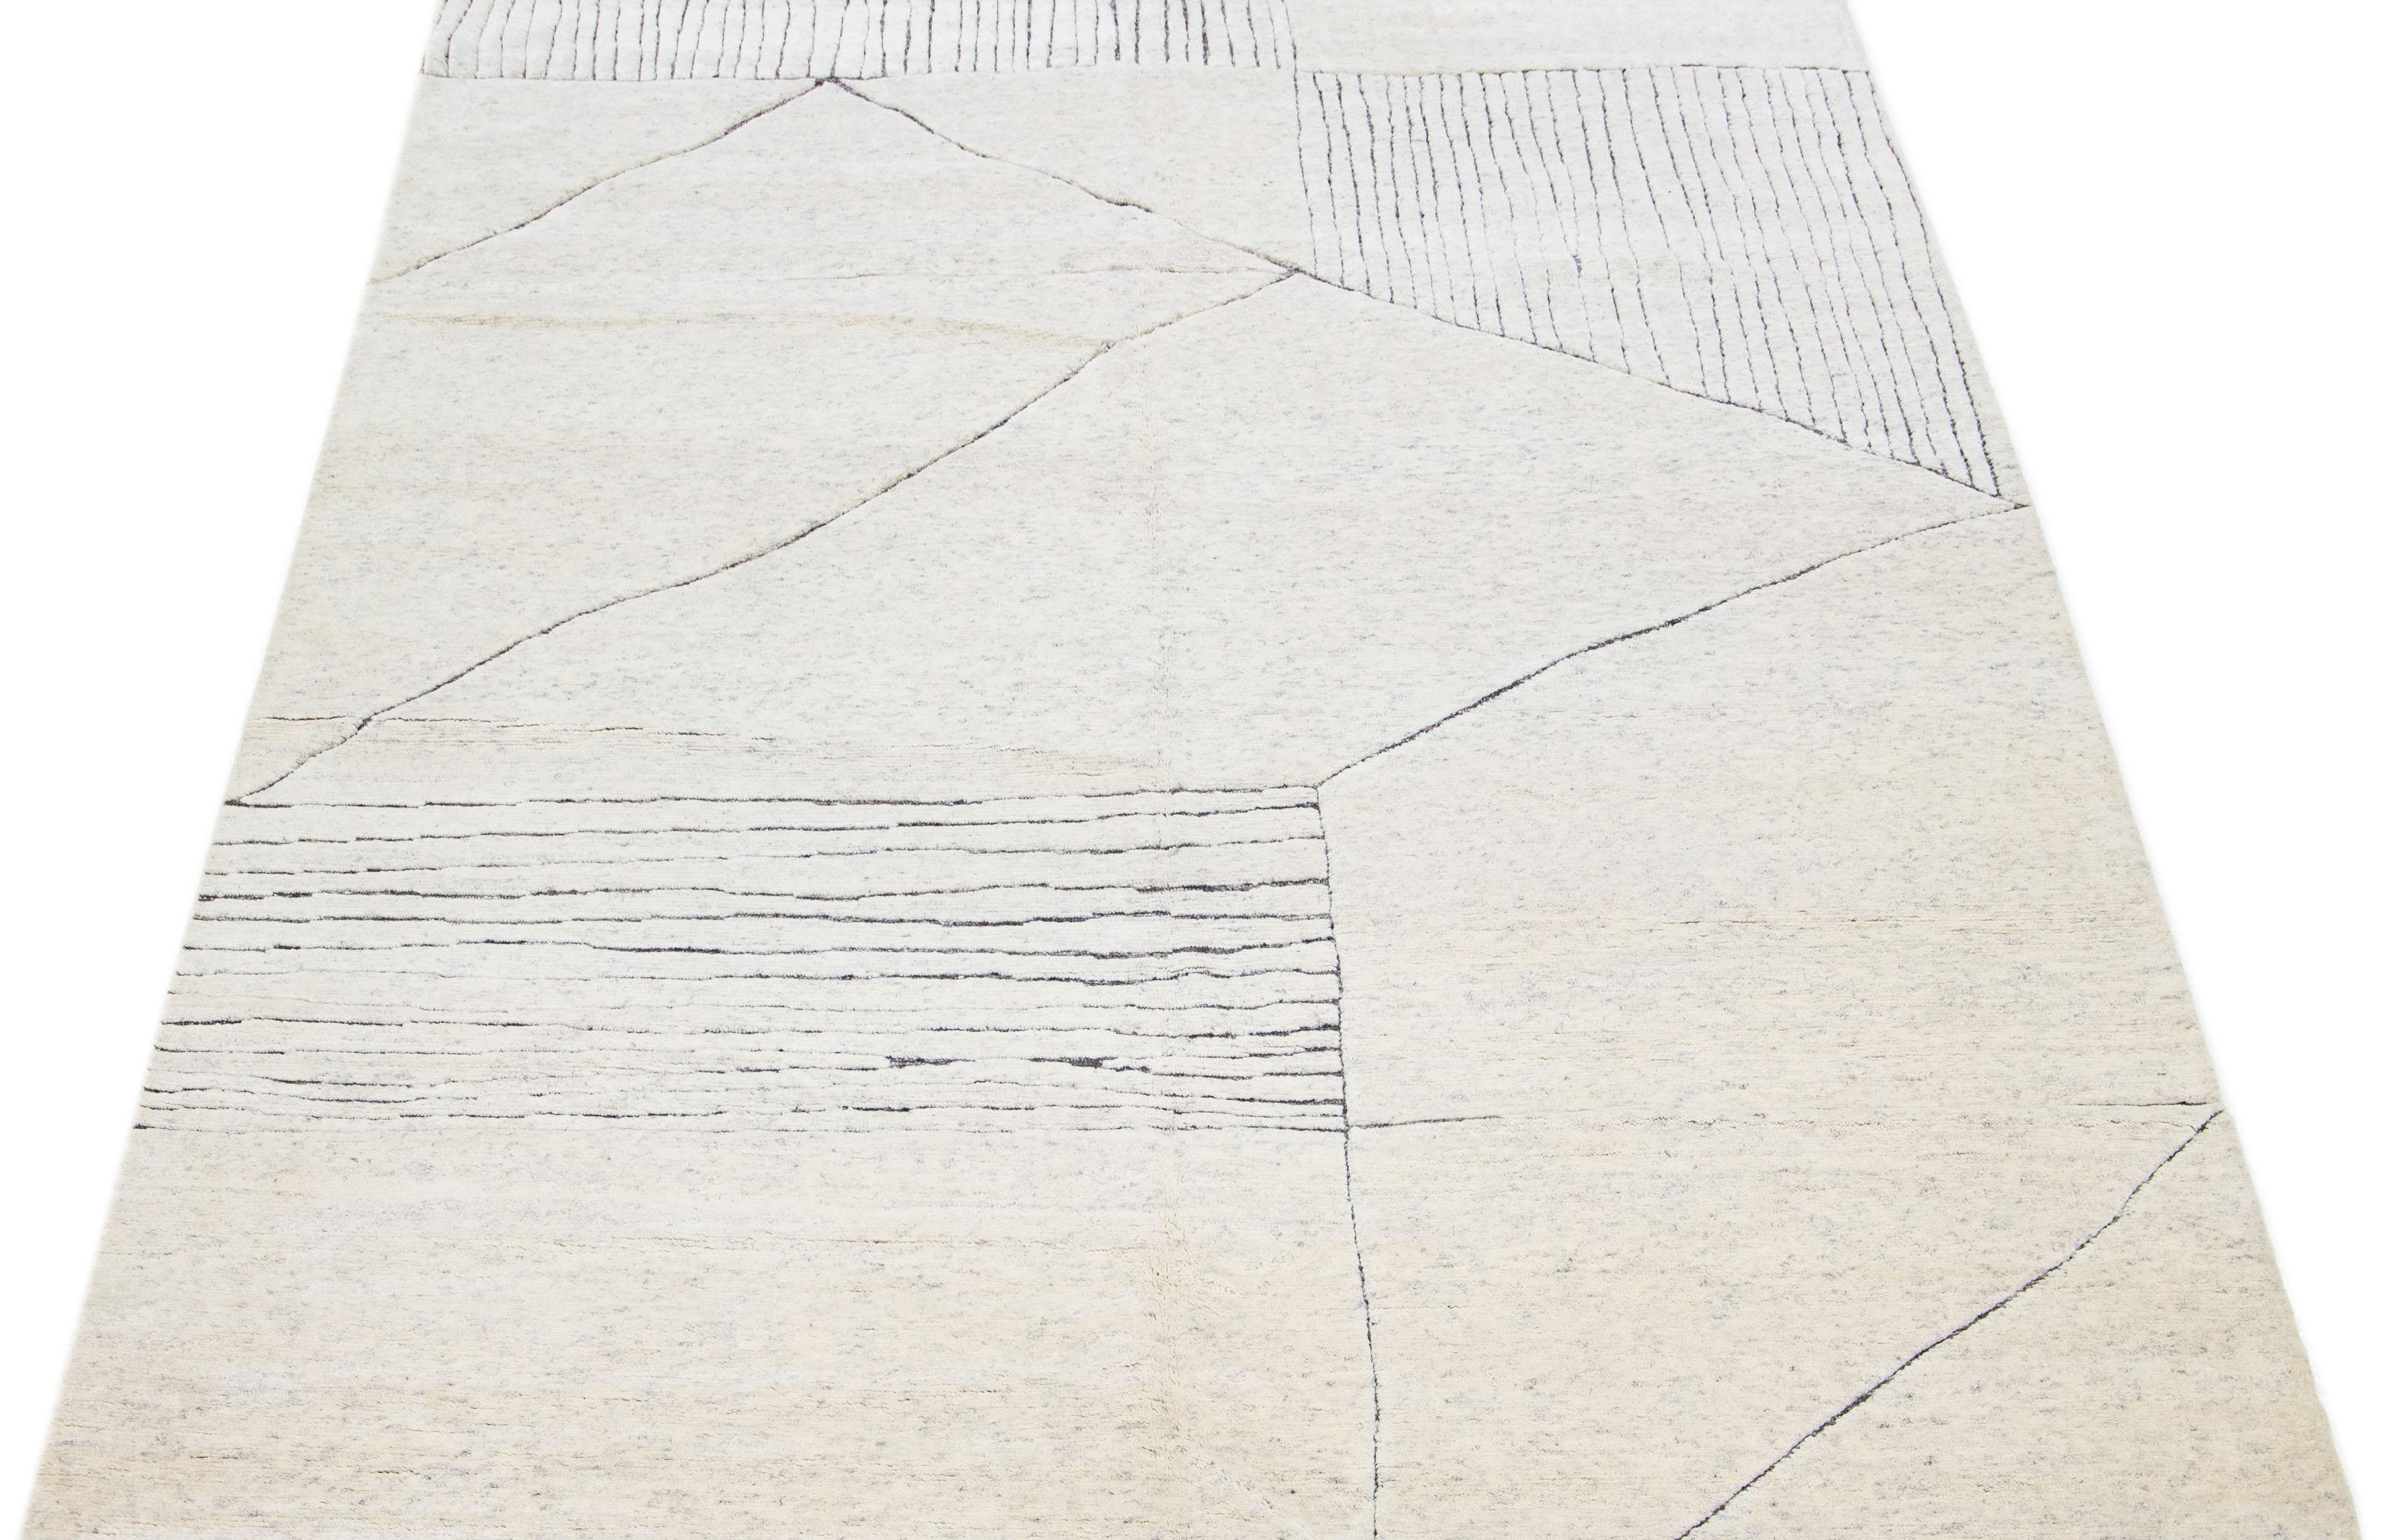 This luxurious wool rug features a timeless Moroccan pattern in a contemporary abstract minimalist style, utilizing ivory and gray tones to create a sleek and modern look. It is crafted using traditional hand-knotting techniques, ensuring